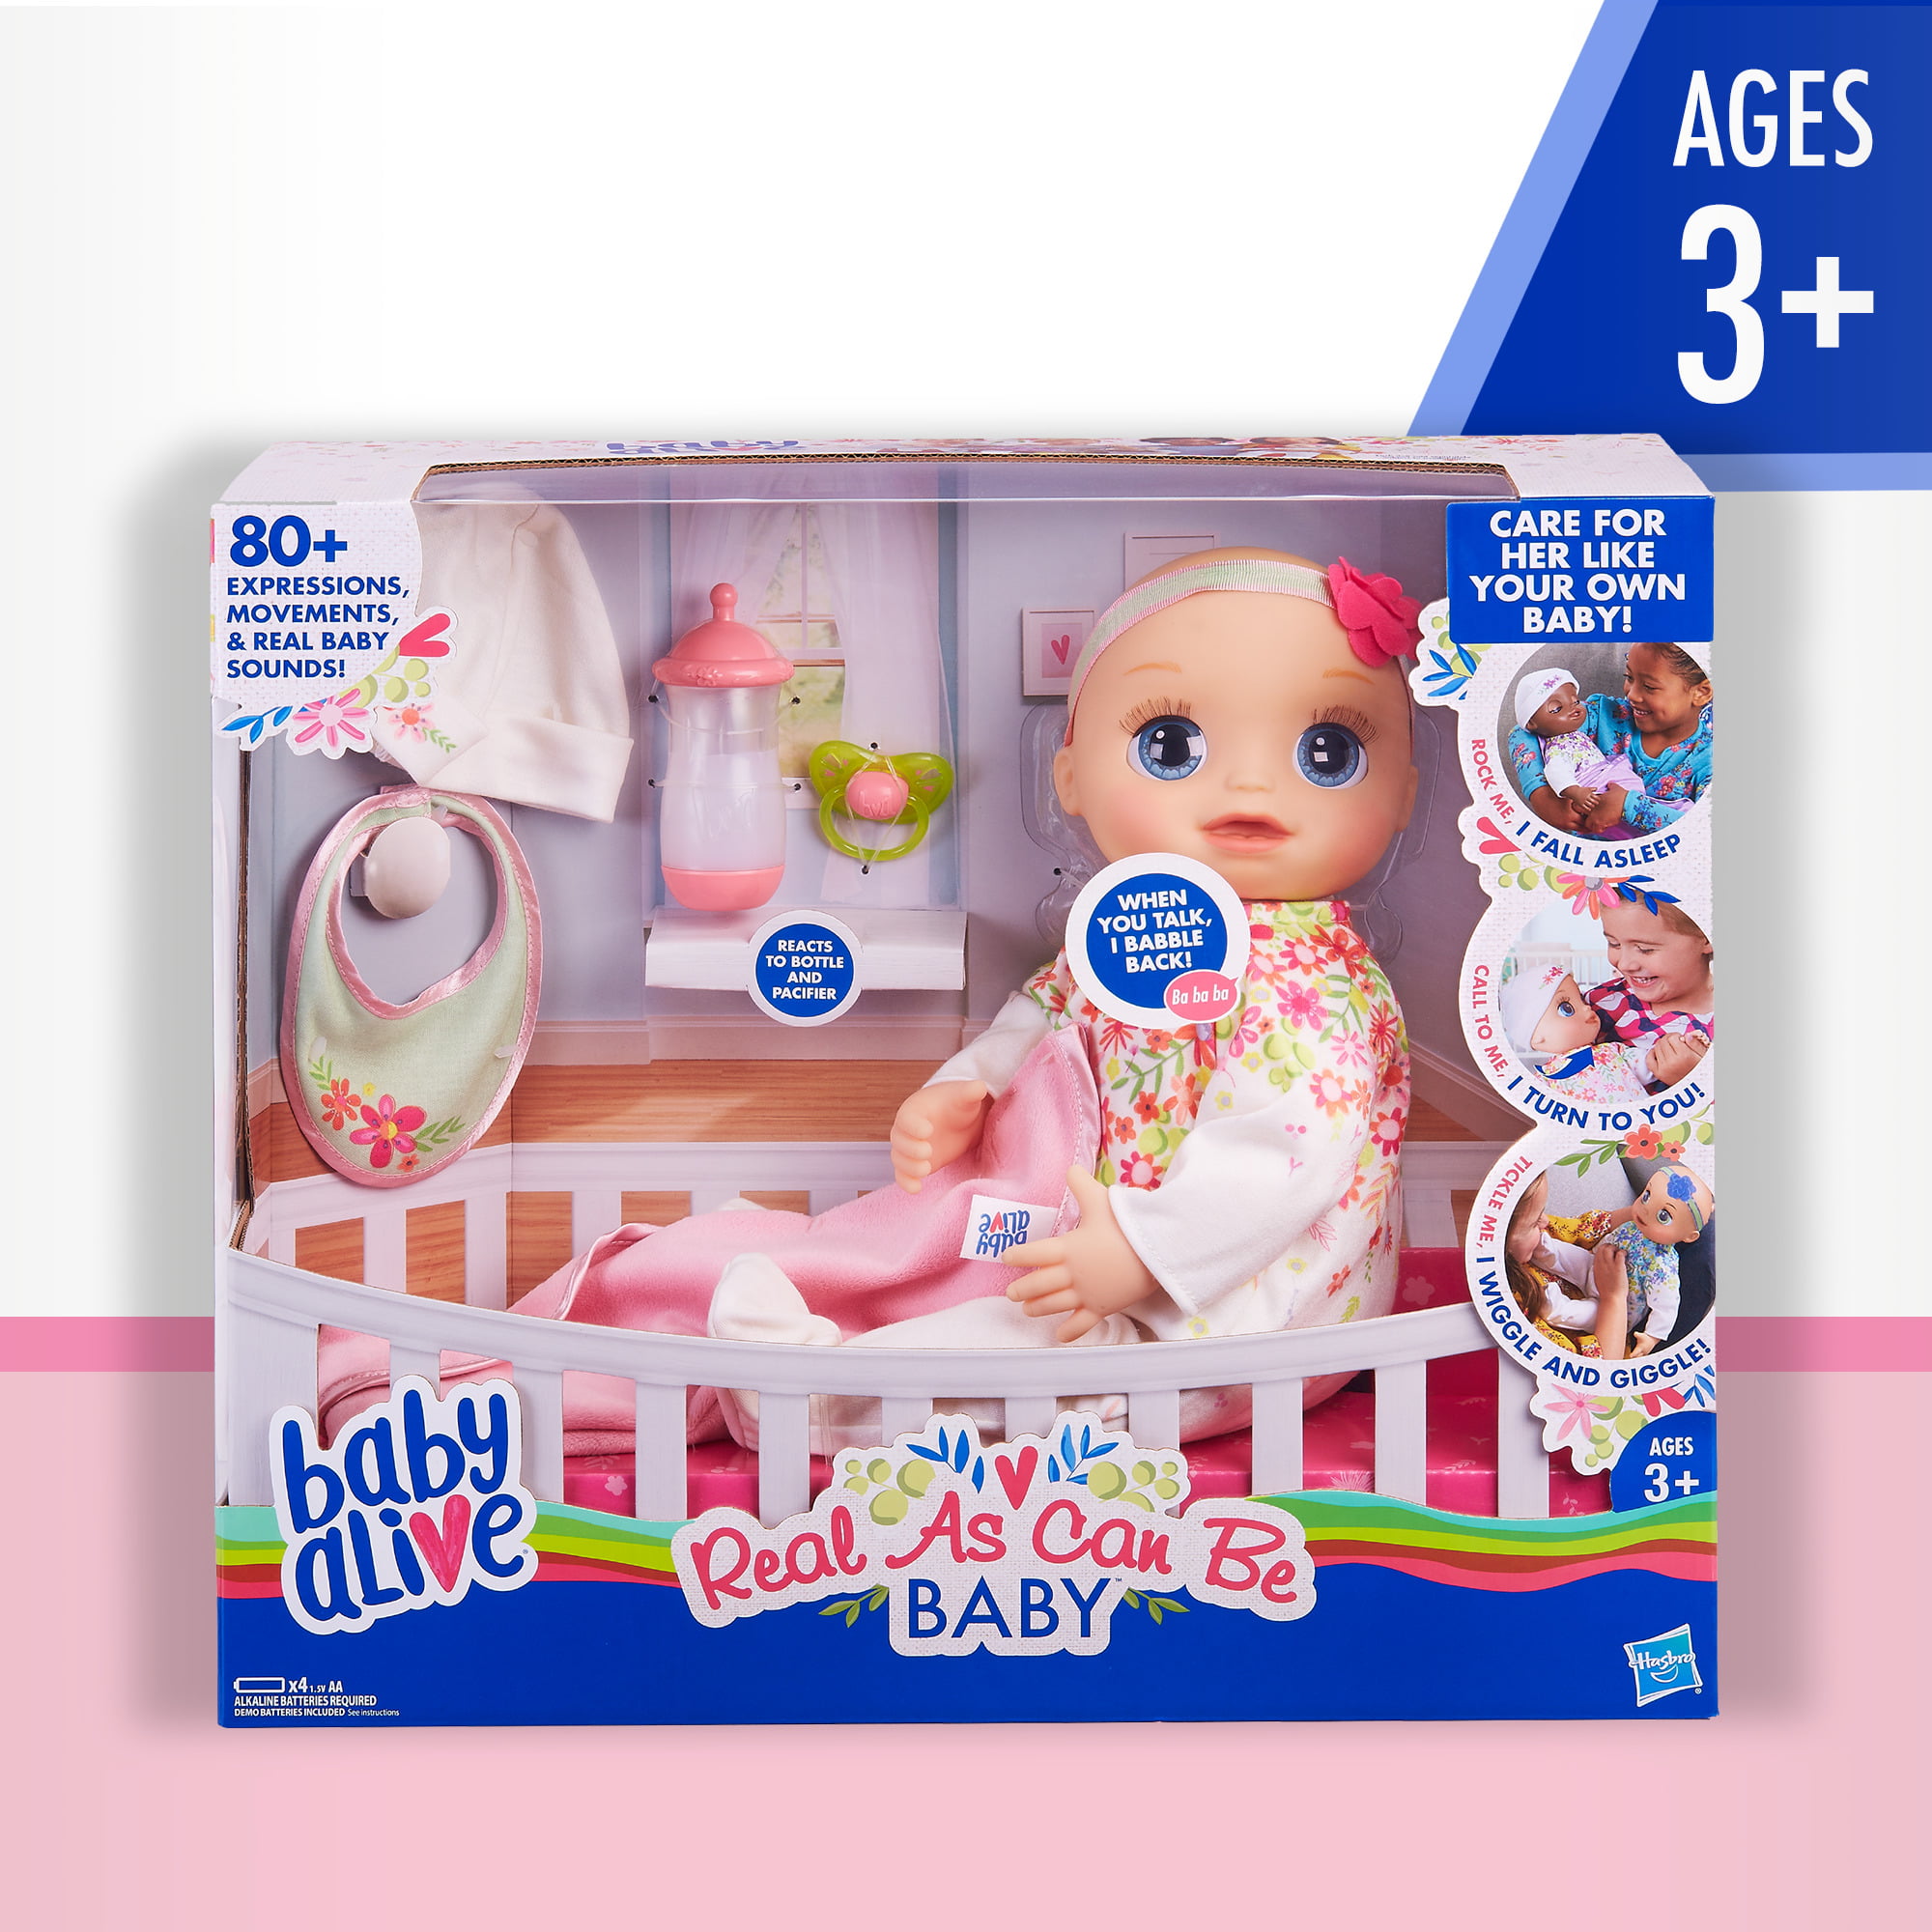 BAMBOLA HASBRO BABY ALIVE AS REAL AS CAN BE BABY 